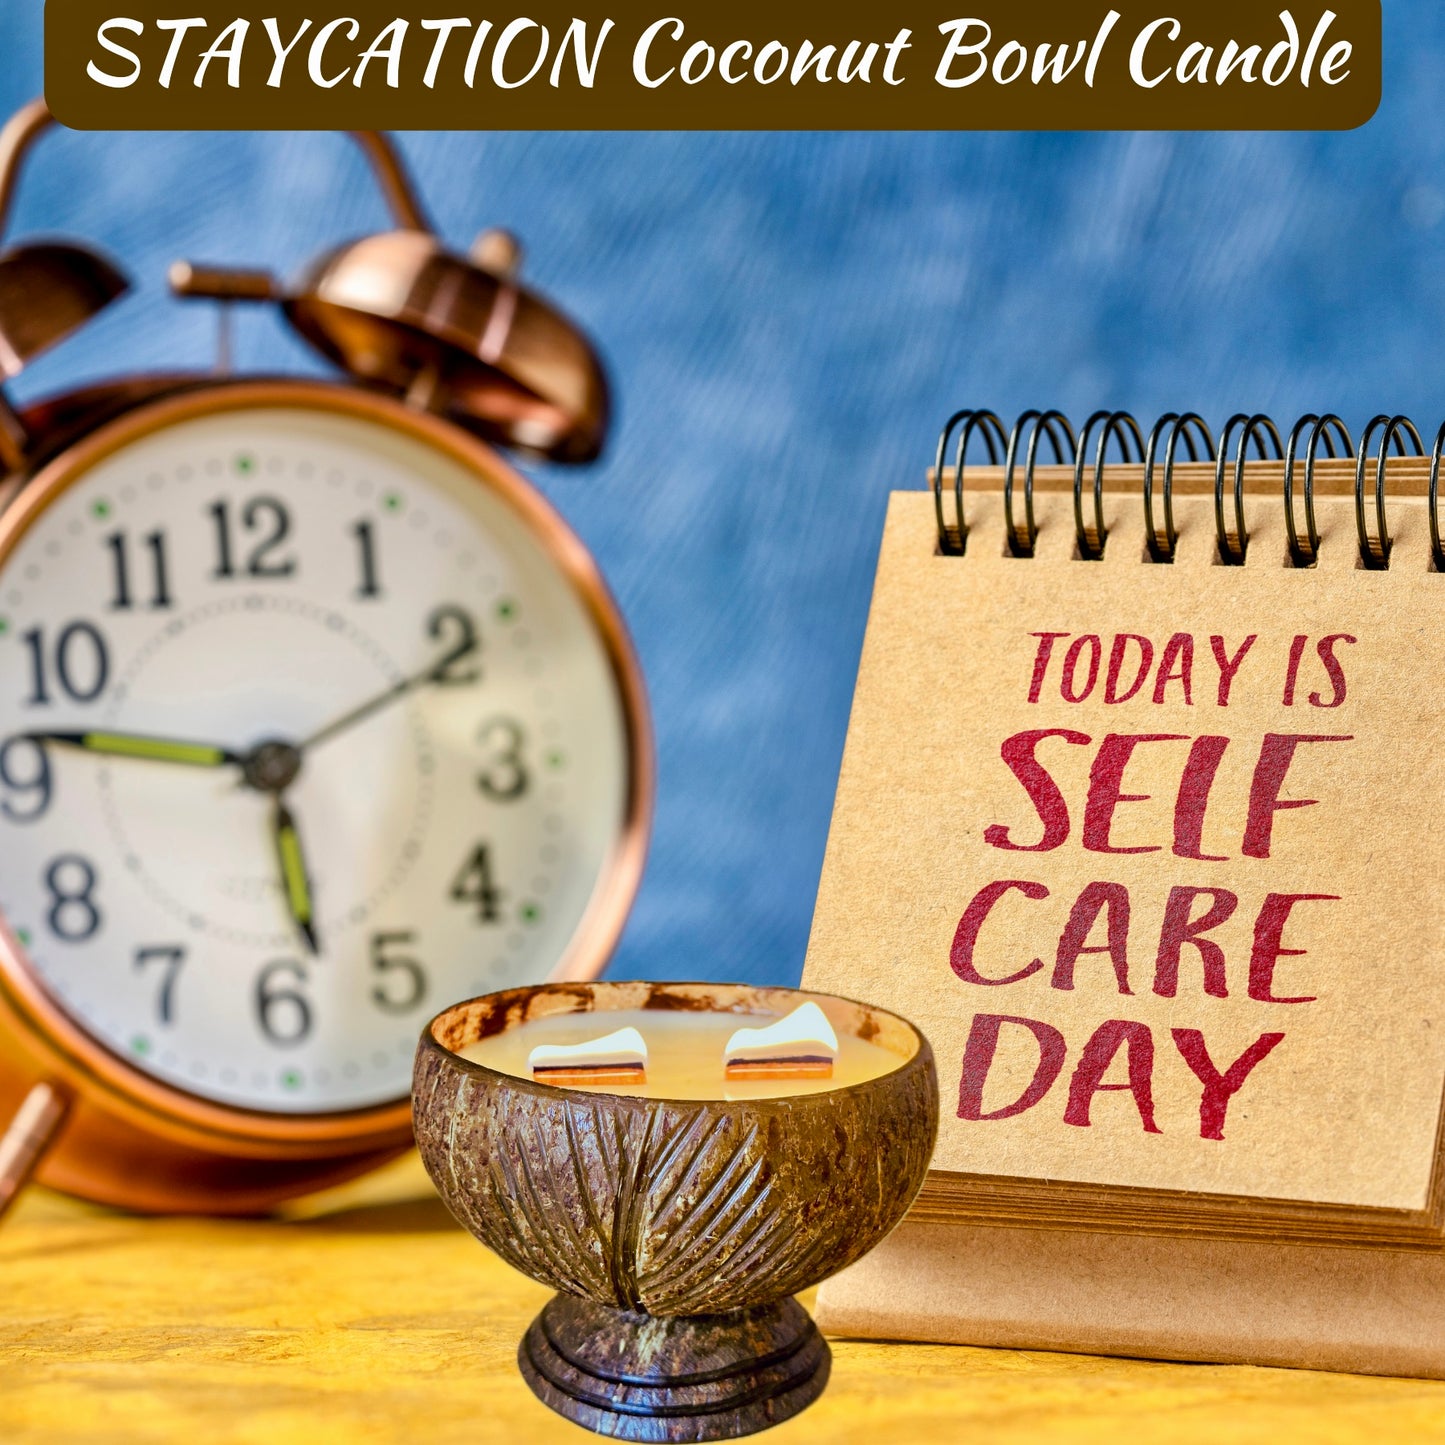 STAYCATION Coconut Bowl Candle